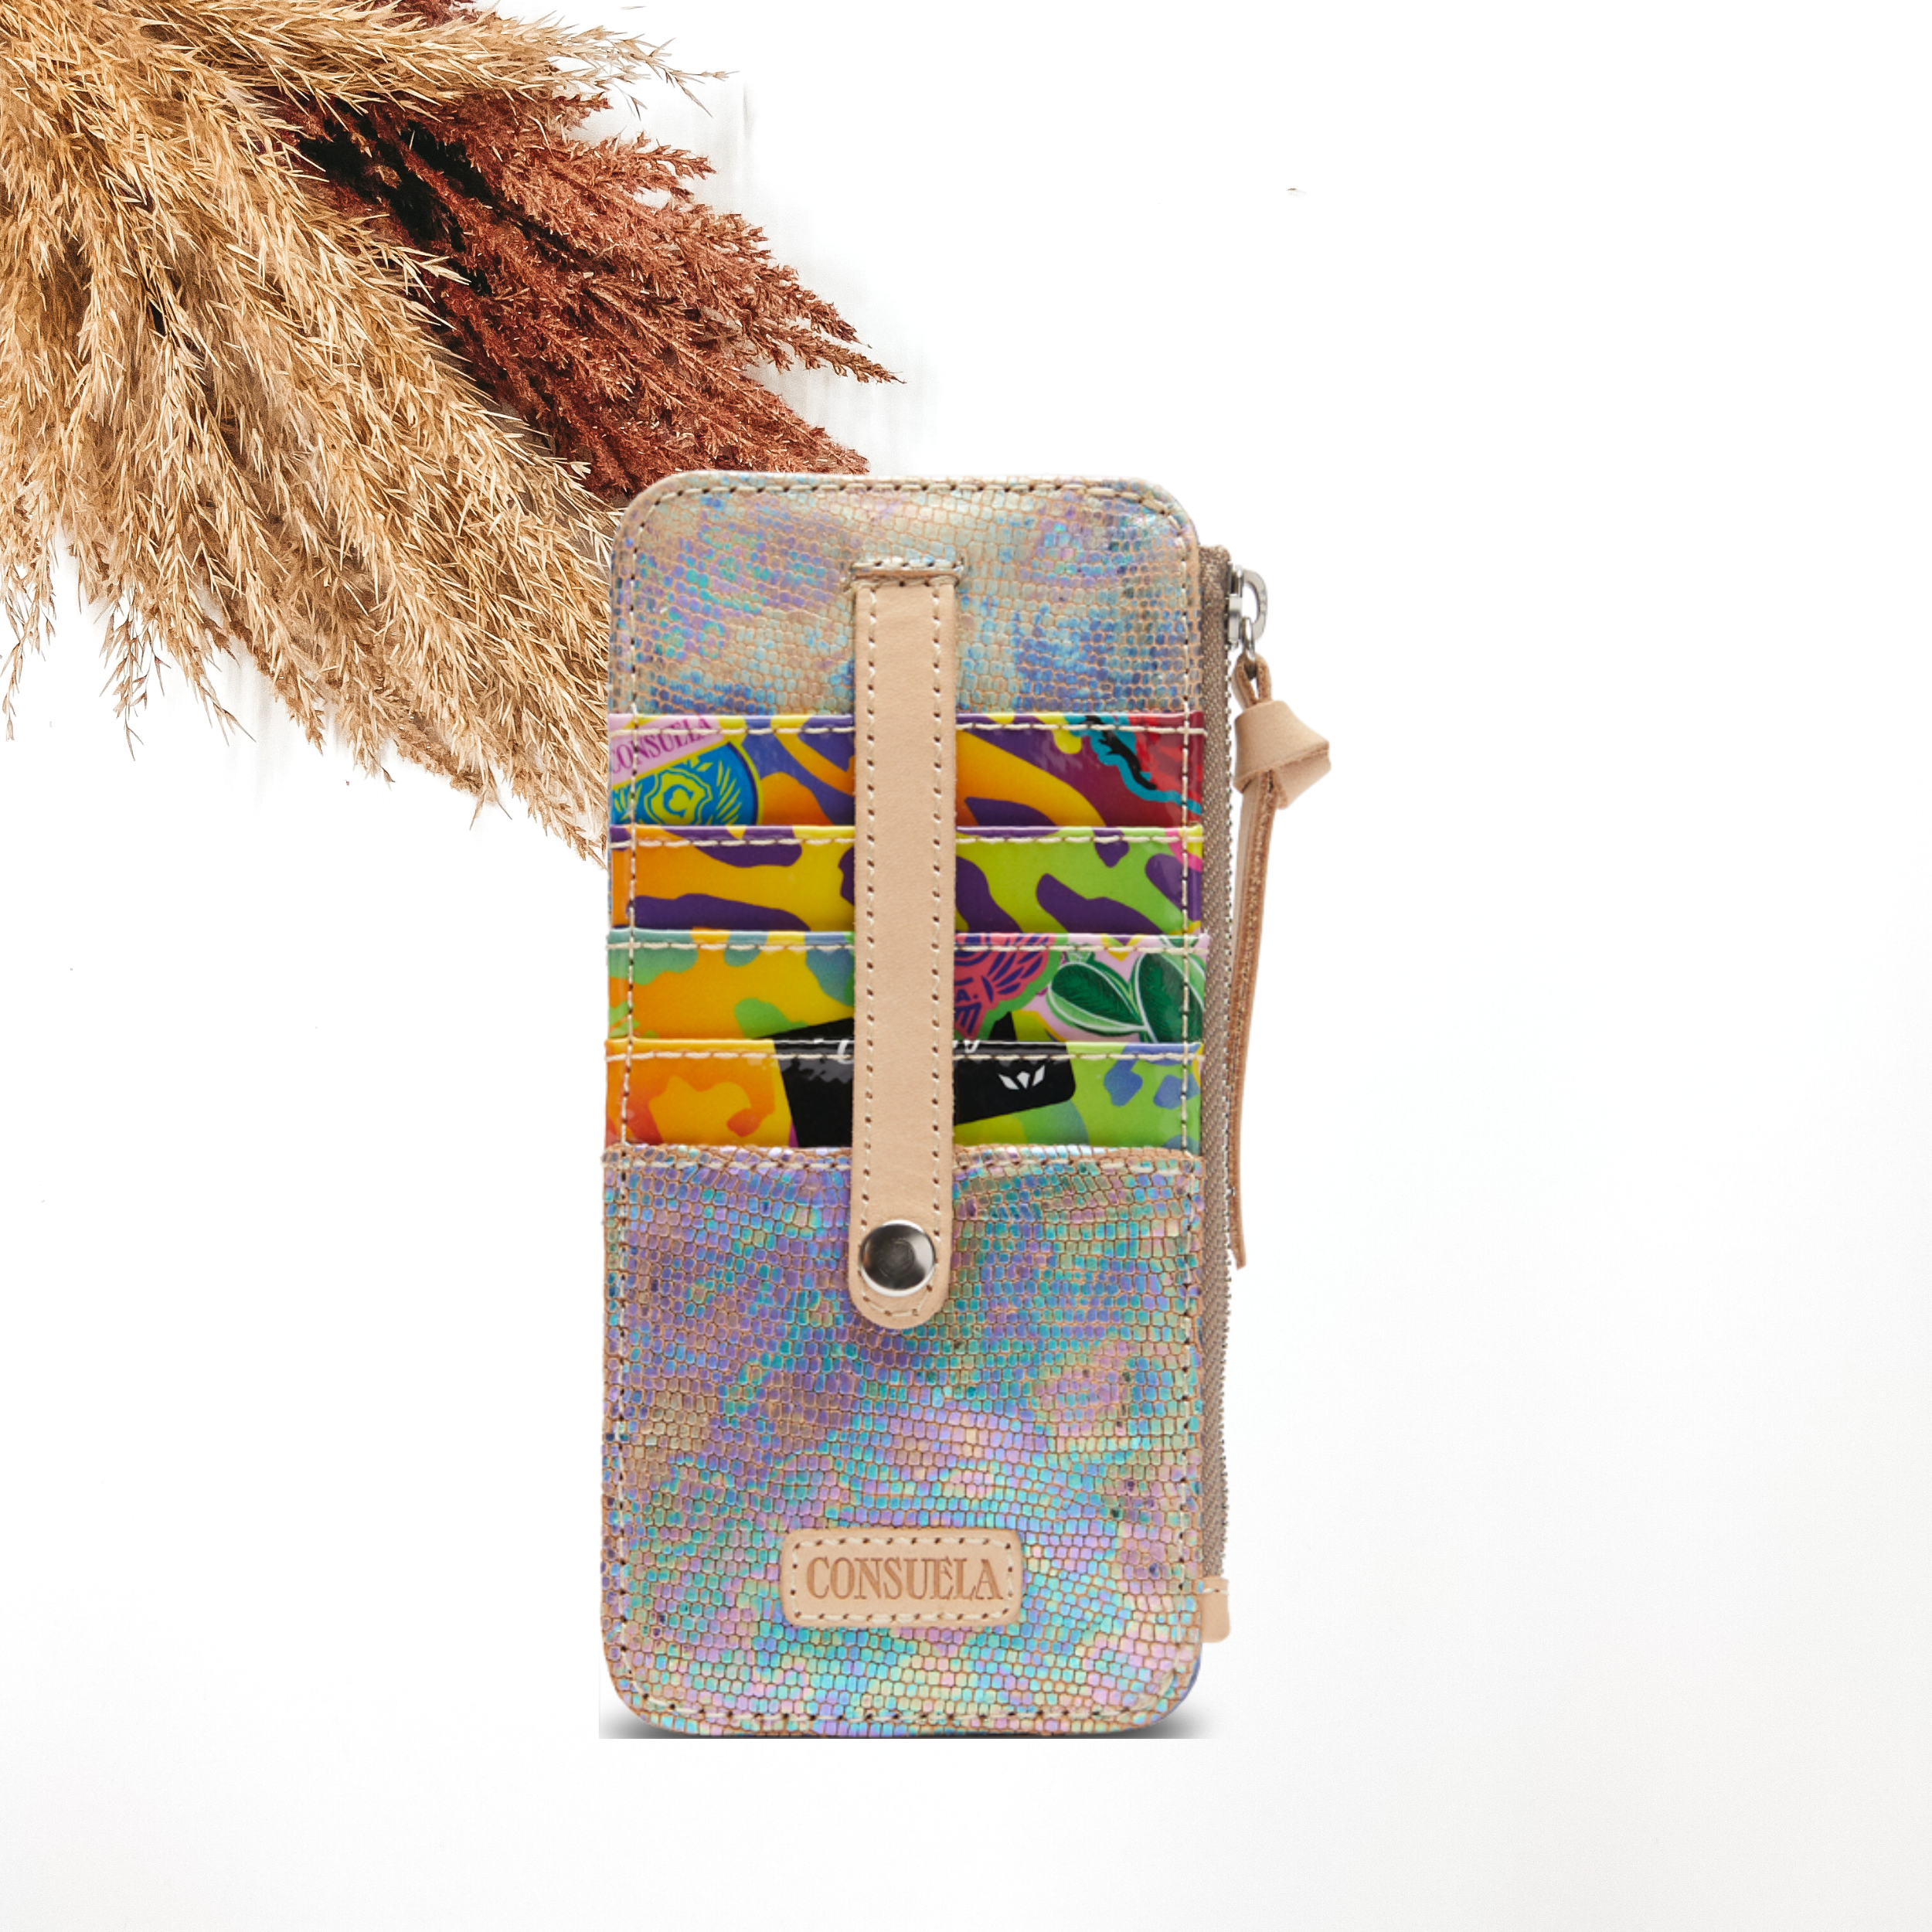 Pictured is a rectangle card organizer. This card organizer is mainly a iridescent tie die design. This card organizer also includes a blue glitter card pockets and a side zipper. This card organizer is pictured on a white background with pompous grass in the top left corner. 